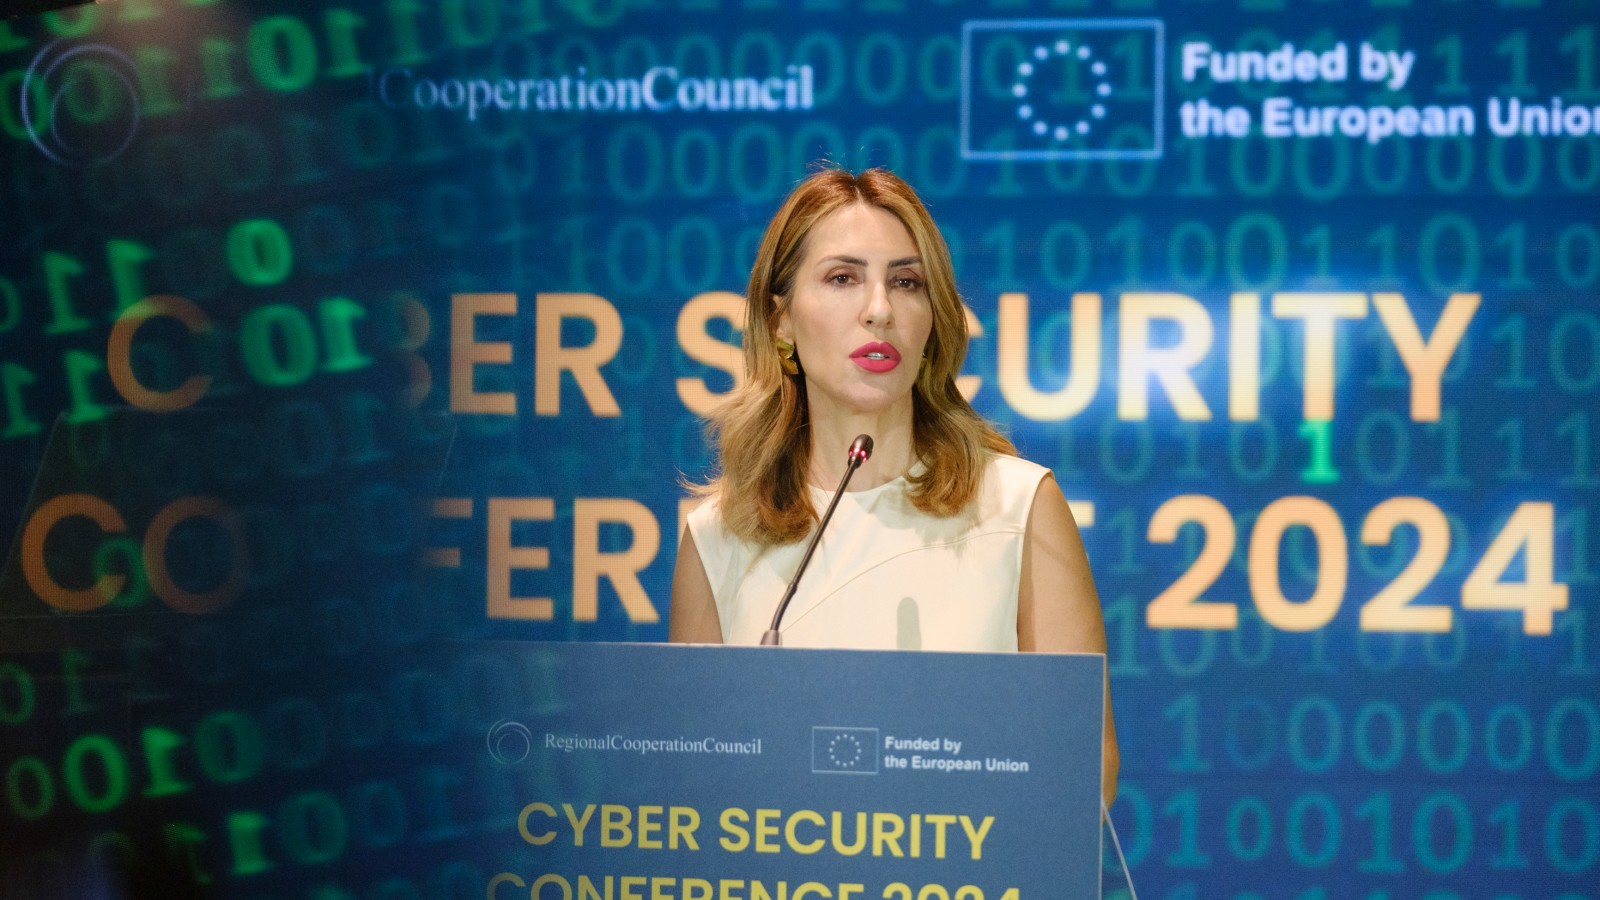 Bregu: All-inclusiveness is paramount in implementing cybersecurity measures across the Western Balkans